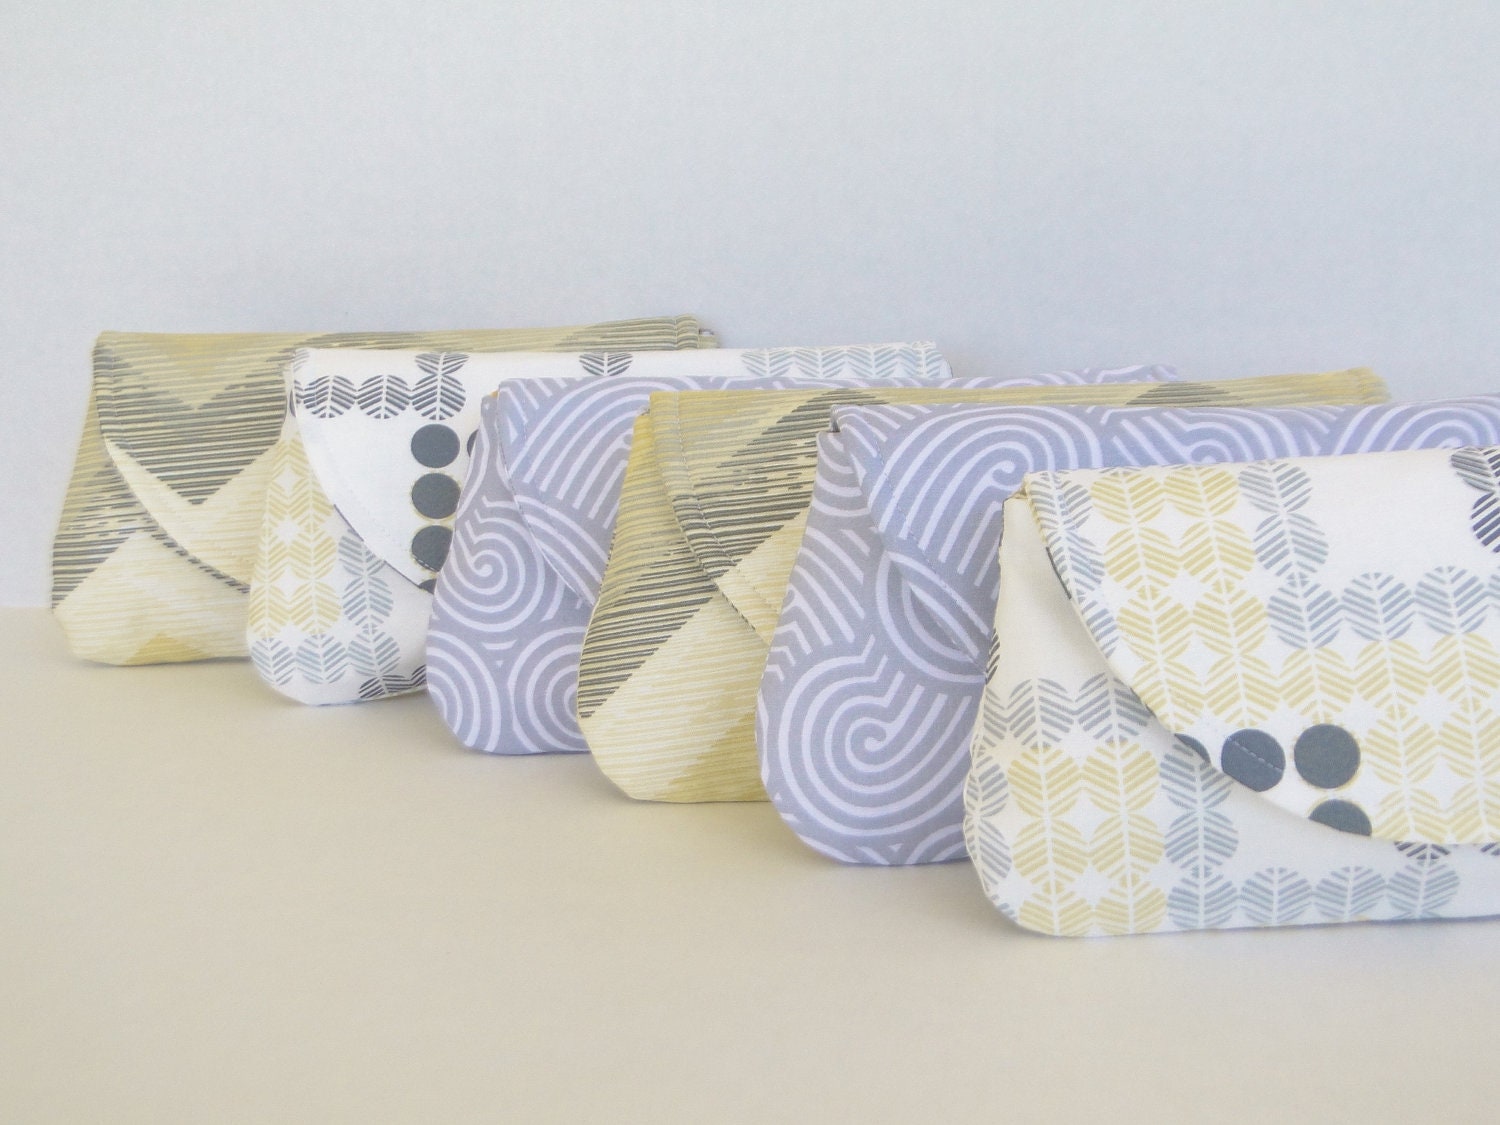 Bridesmaids clutches in yellow and gray, wedding party purse silver, canary, pewter wedding  FREE shipping (U.S.)